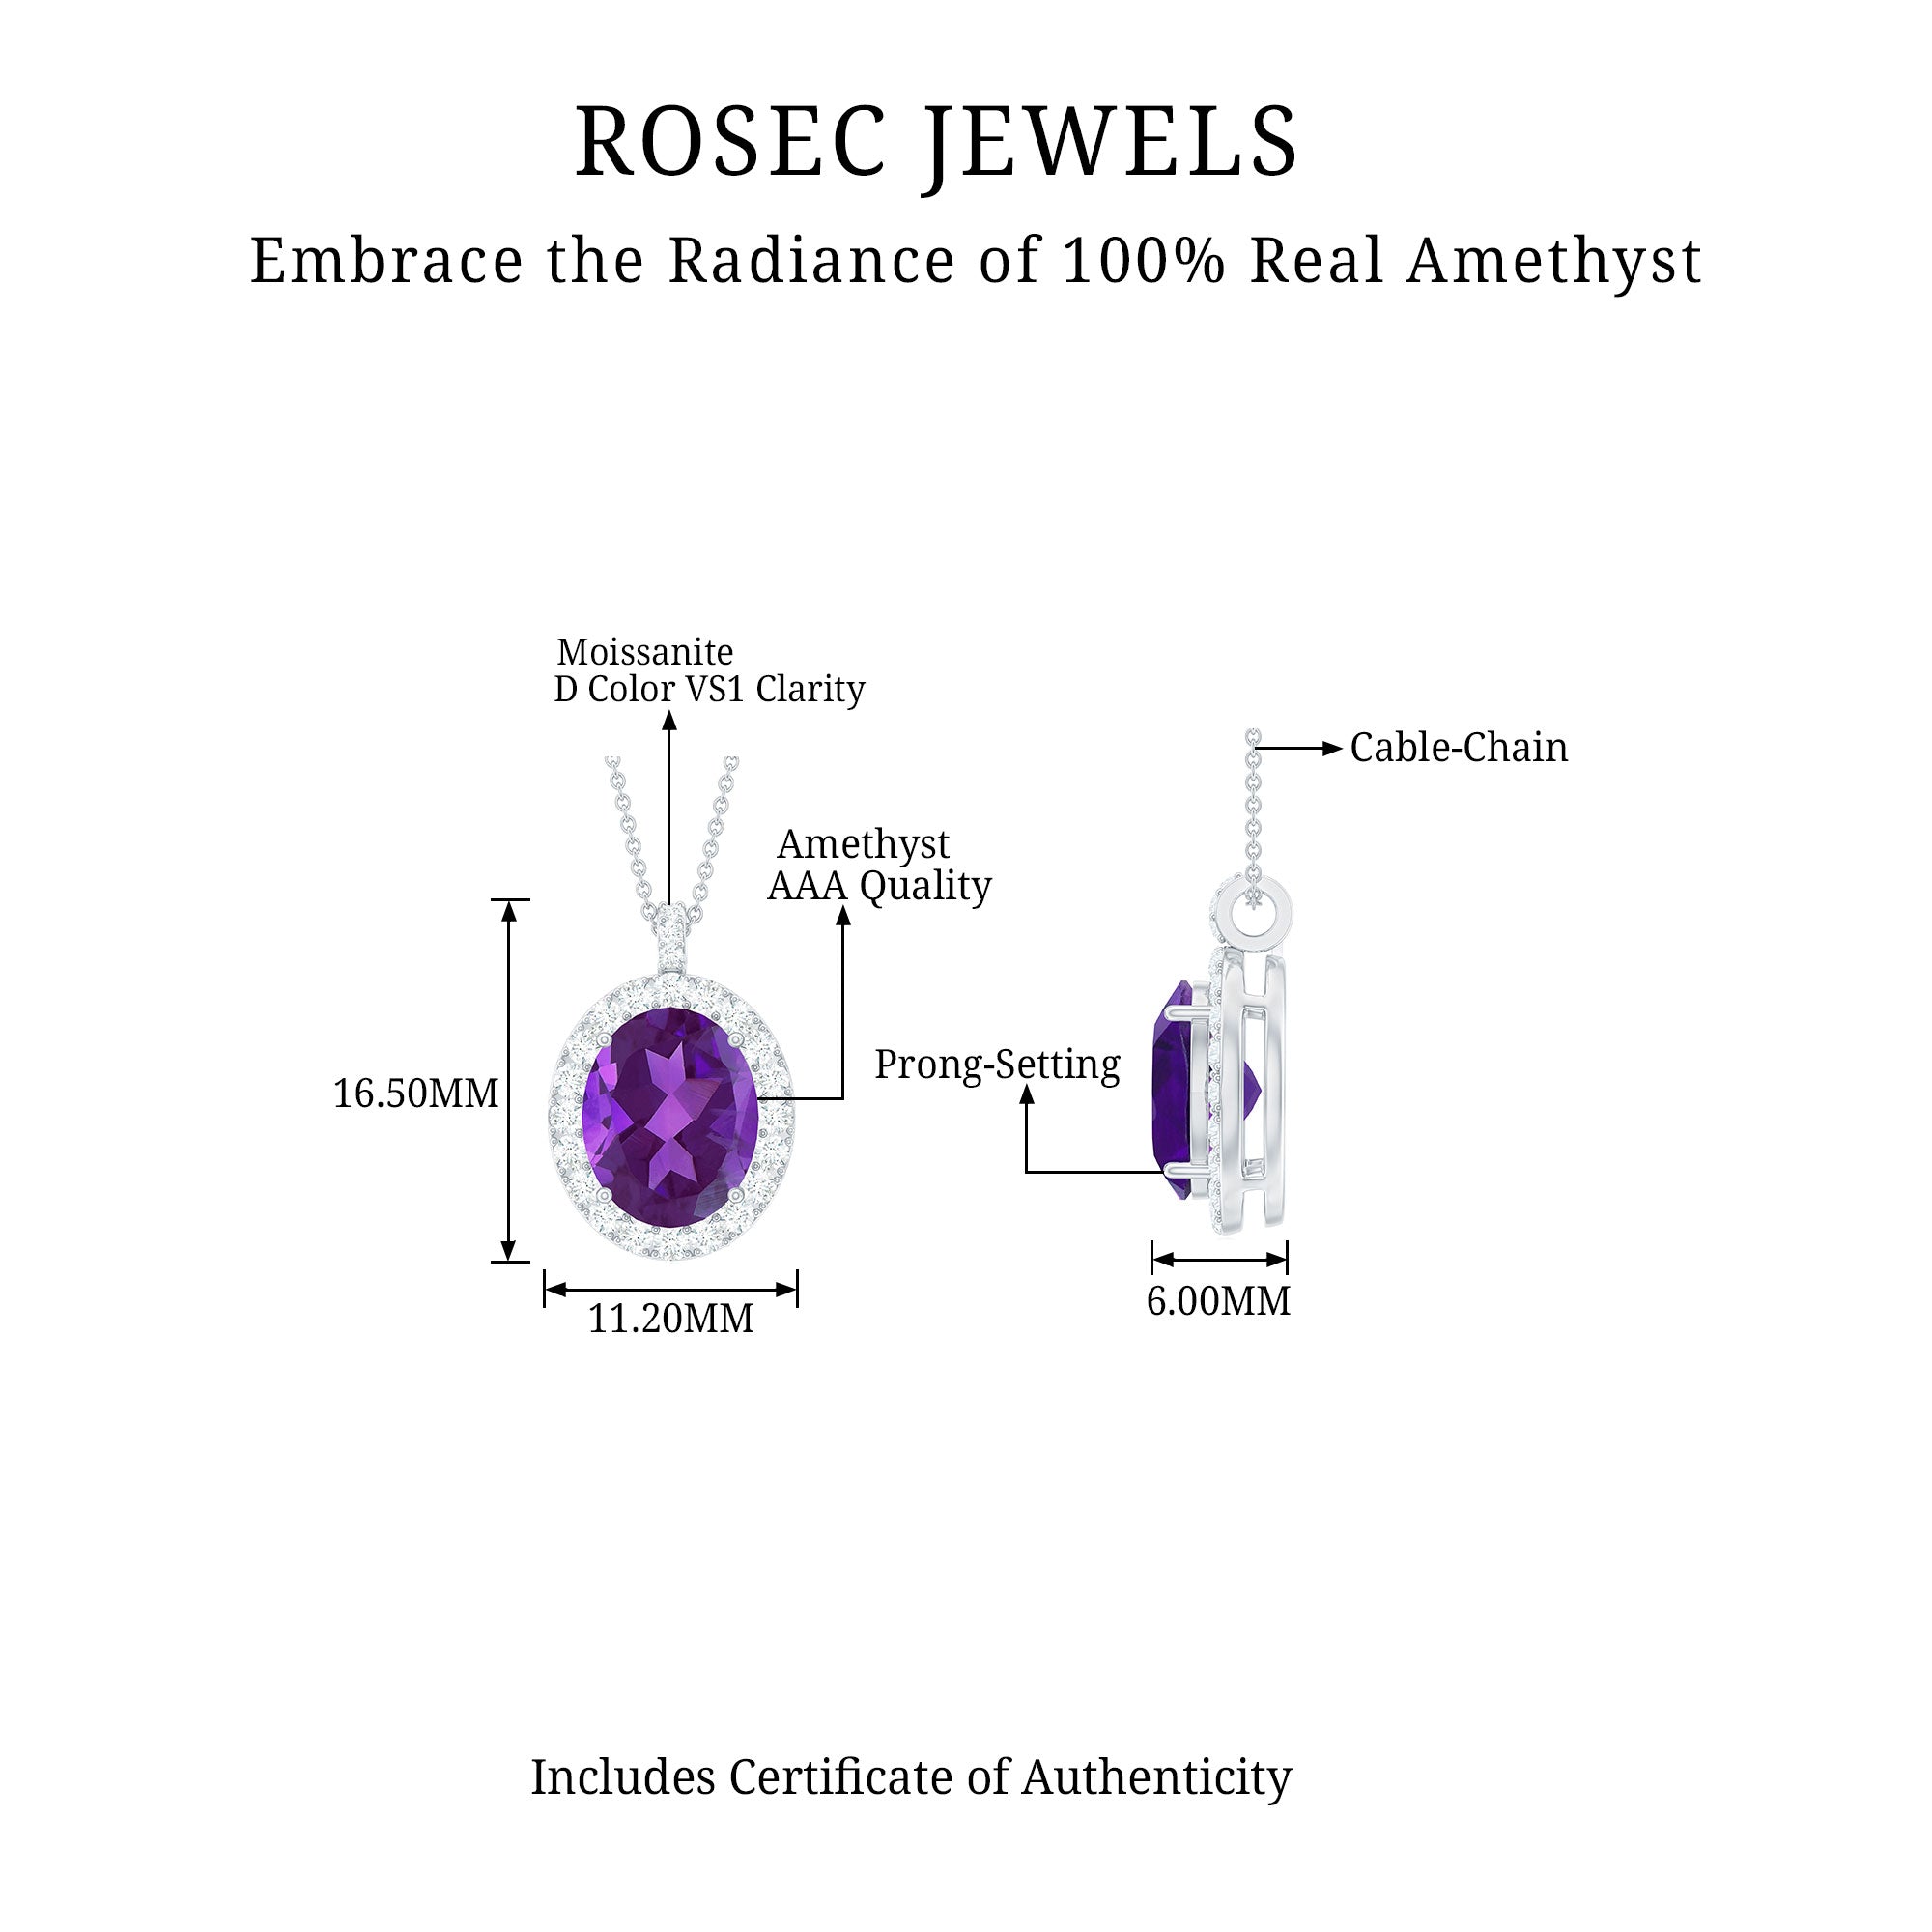 3 CT Certified Amethyst Silver Pendant with Moissanite Halo - Rosec Jewels